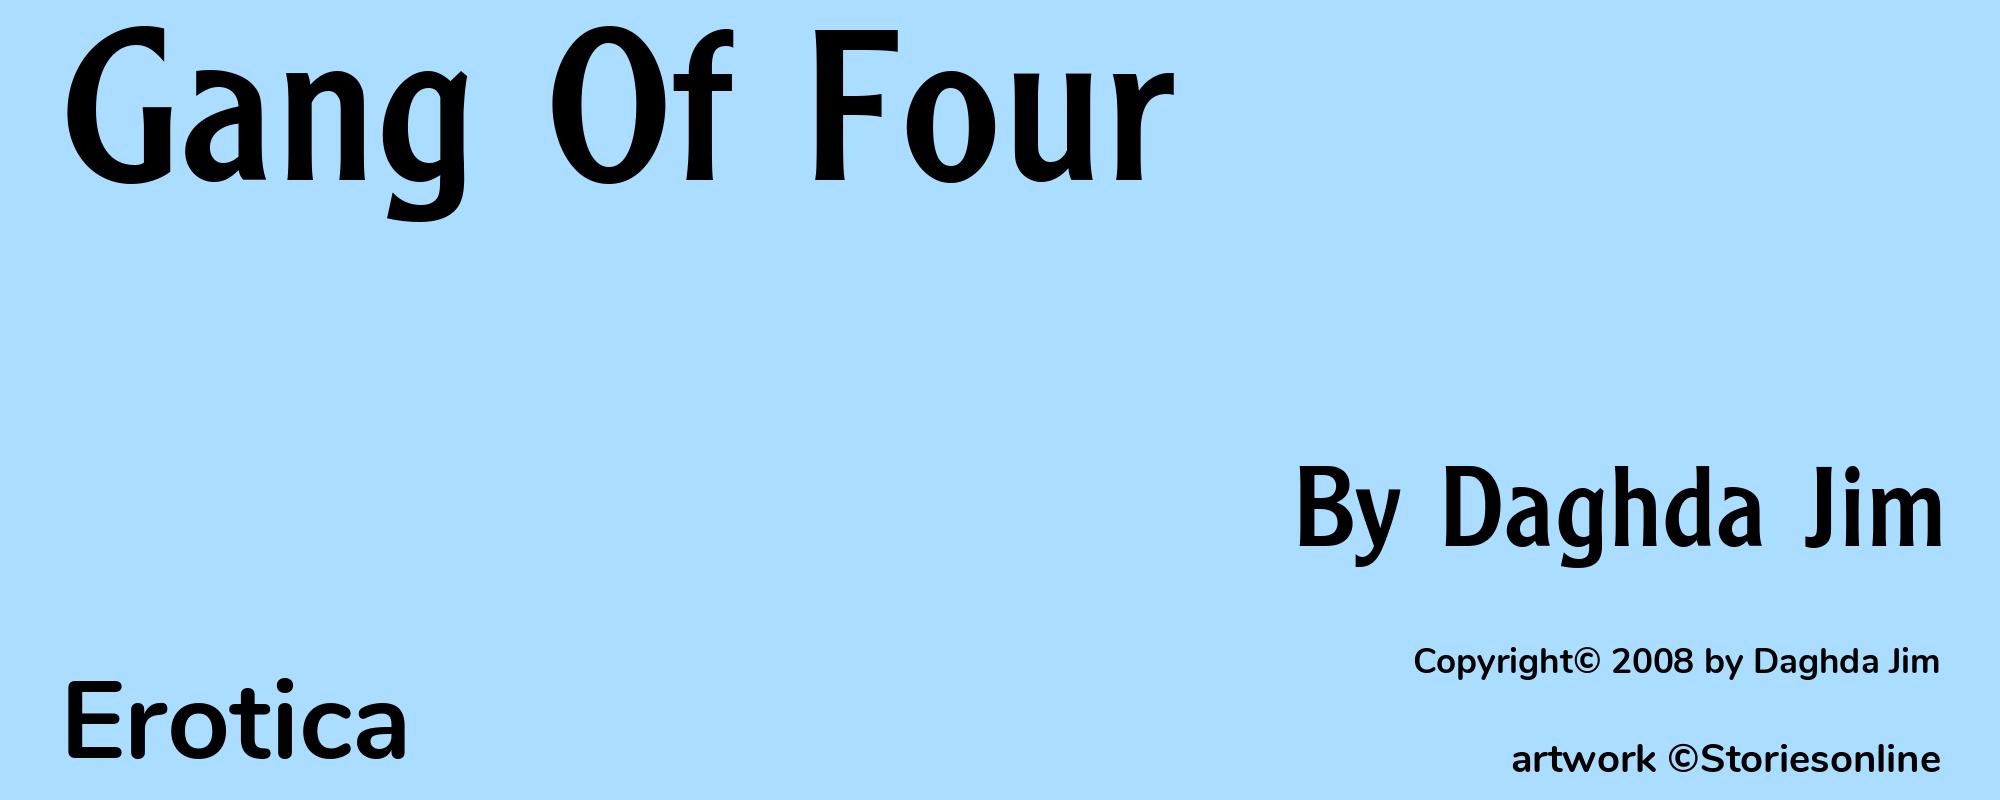 Gang Of Four - Cover